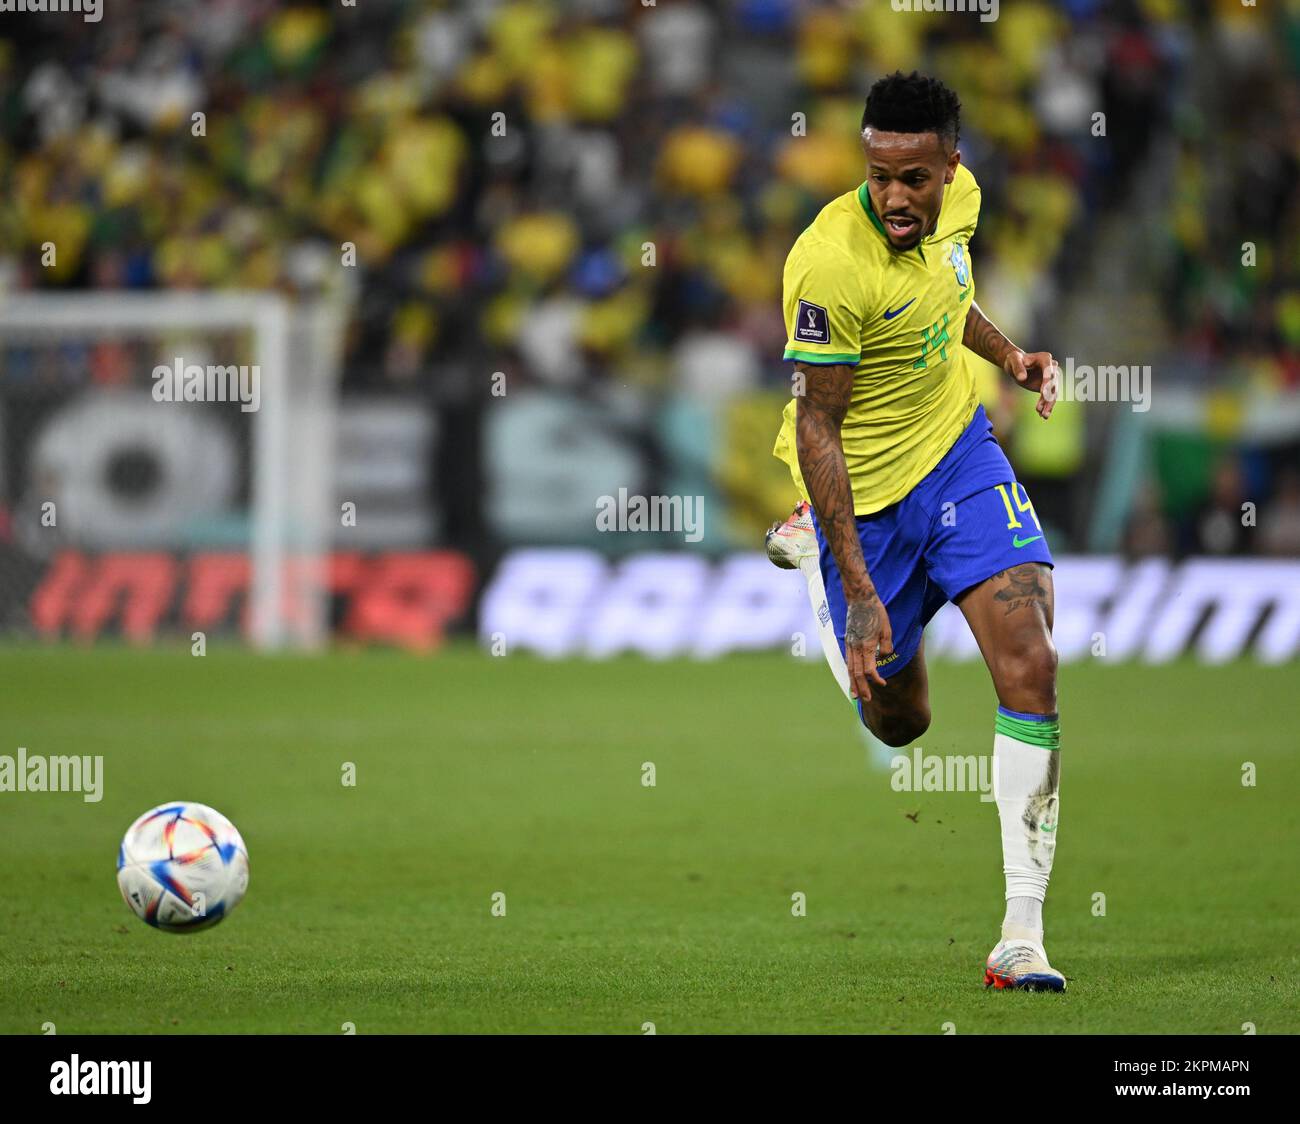 Doha, Qatar. 28th Nov, 2022. Éder Militão do Brasil during a match between Brazil and Switzerland, valid for the group stage of the World Cup, held at Estádio 974 in Doha, Qatar. Credit: Richard Callis/FotoArena/Alamy Live News Stock Photo